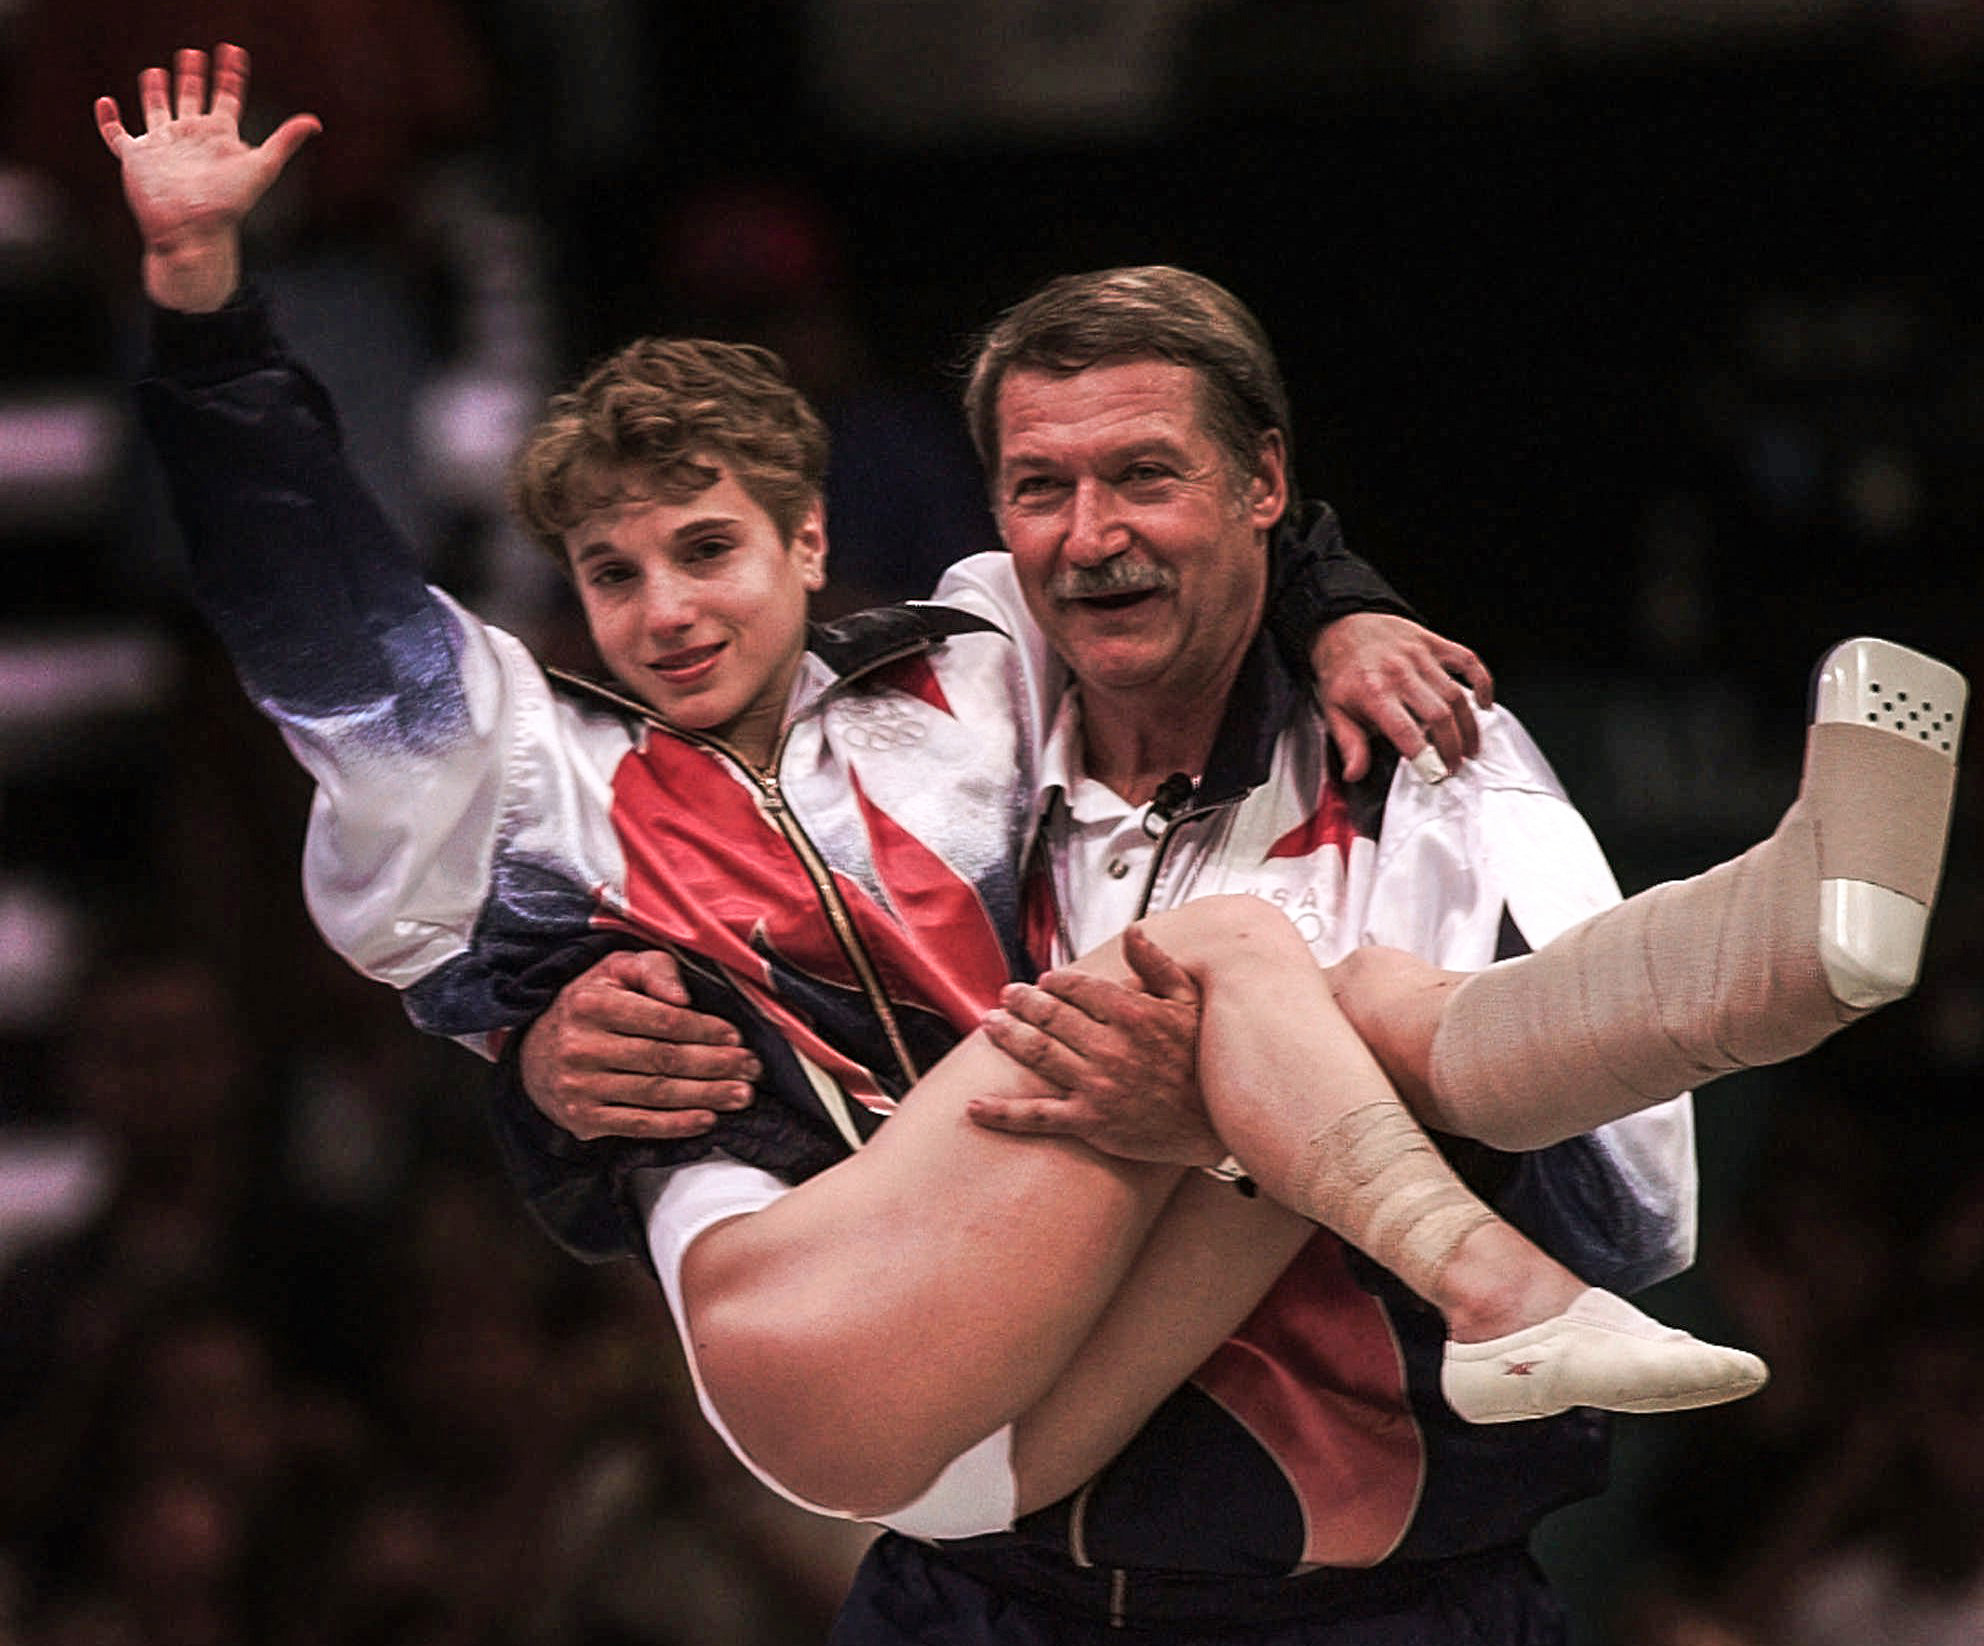 Kerri Strug is carried by her coach, Bela Karolyi, during the 1996 Olympics.